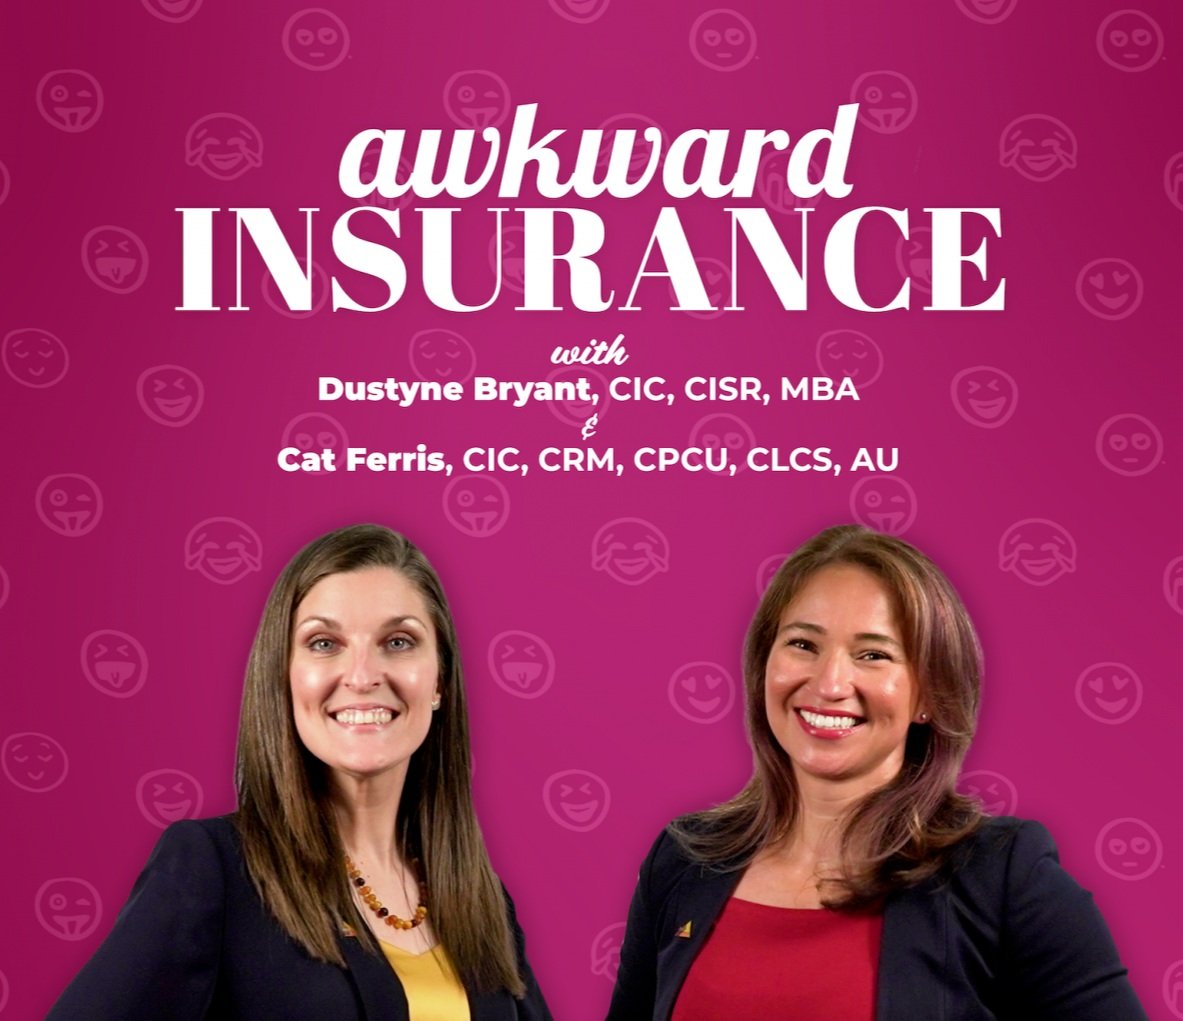 Dustyne Bryant and Cat Ferris welcome Meg to the Awkward Insurance podcast.